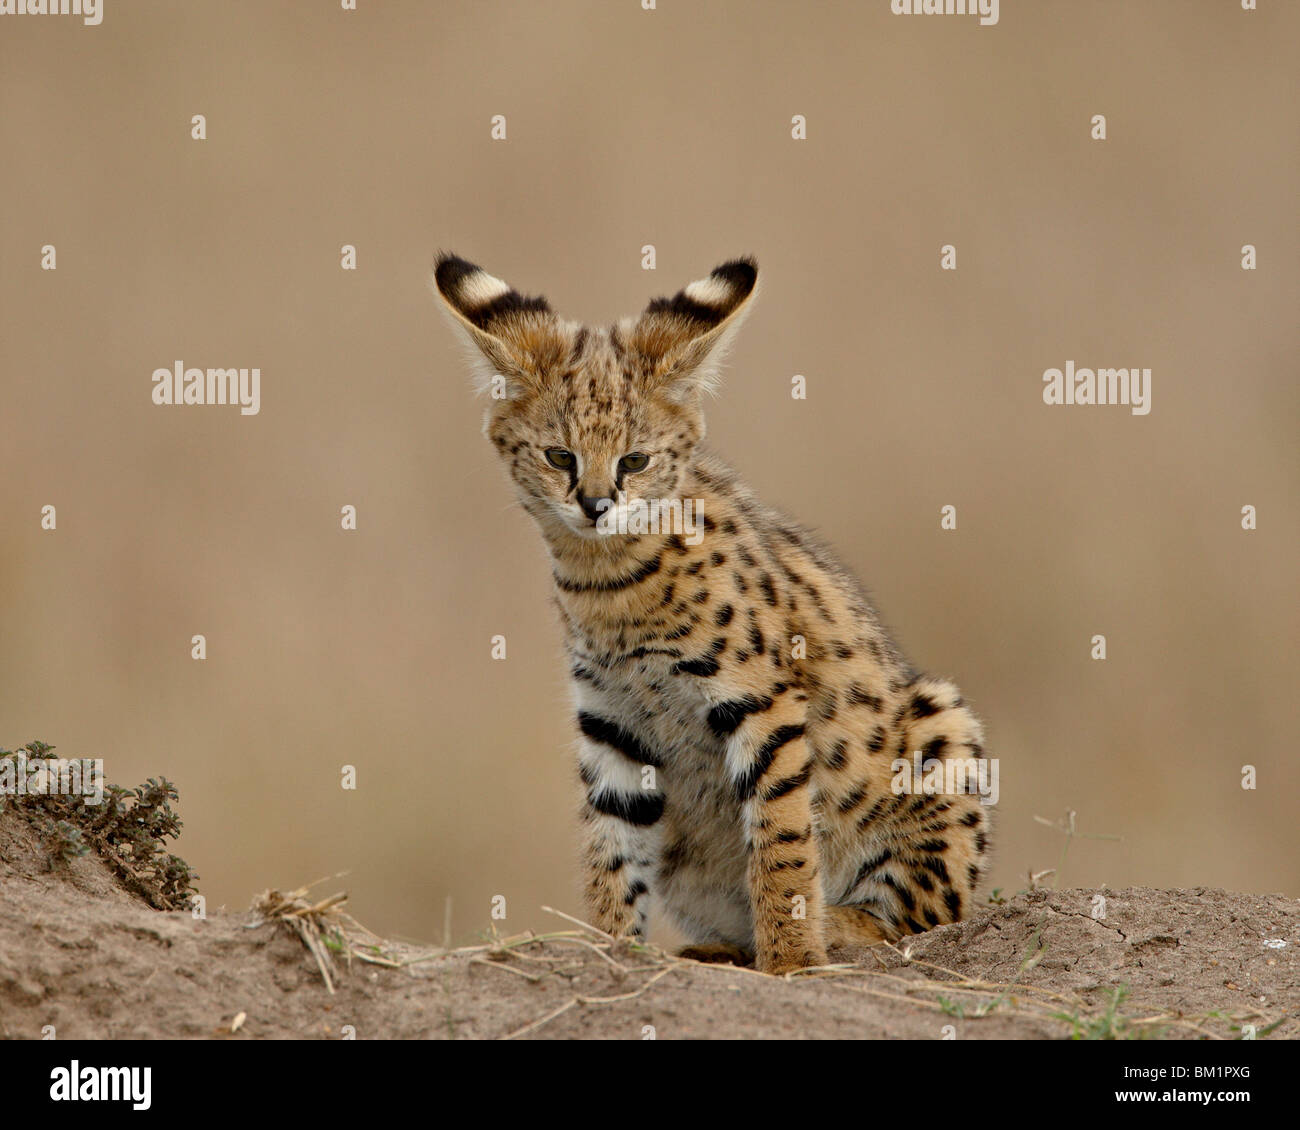 Serval (Felis serval) cub on termite mound showing the back of its ears, Masai Mara National Reserve, Kenya, East Africa, Africa Stock Photo